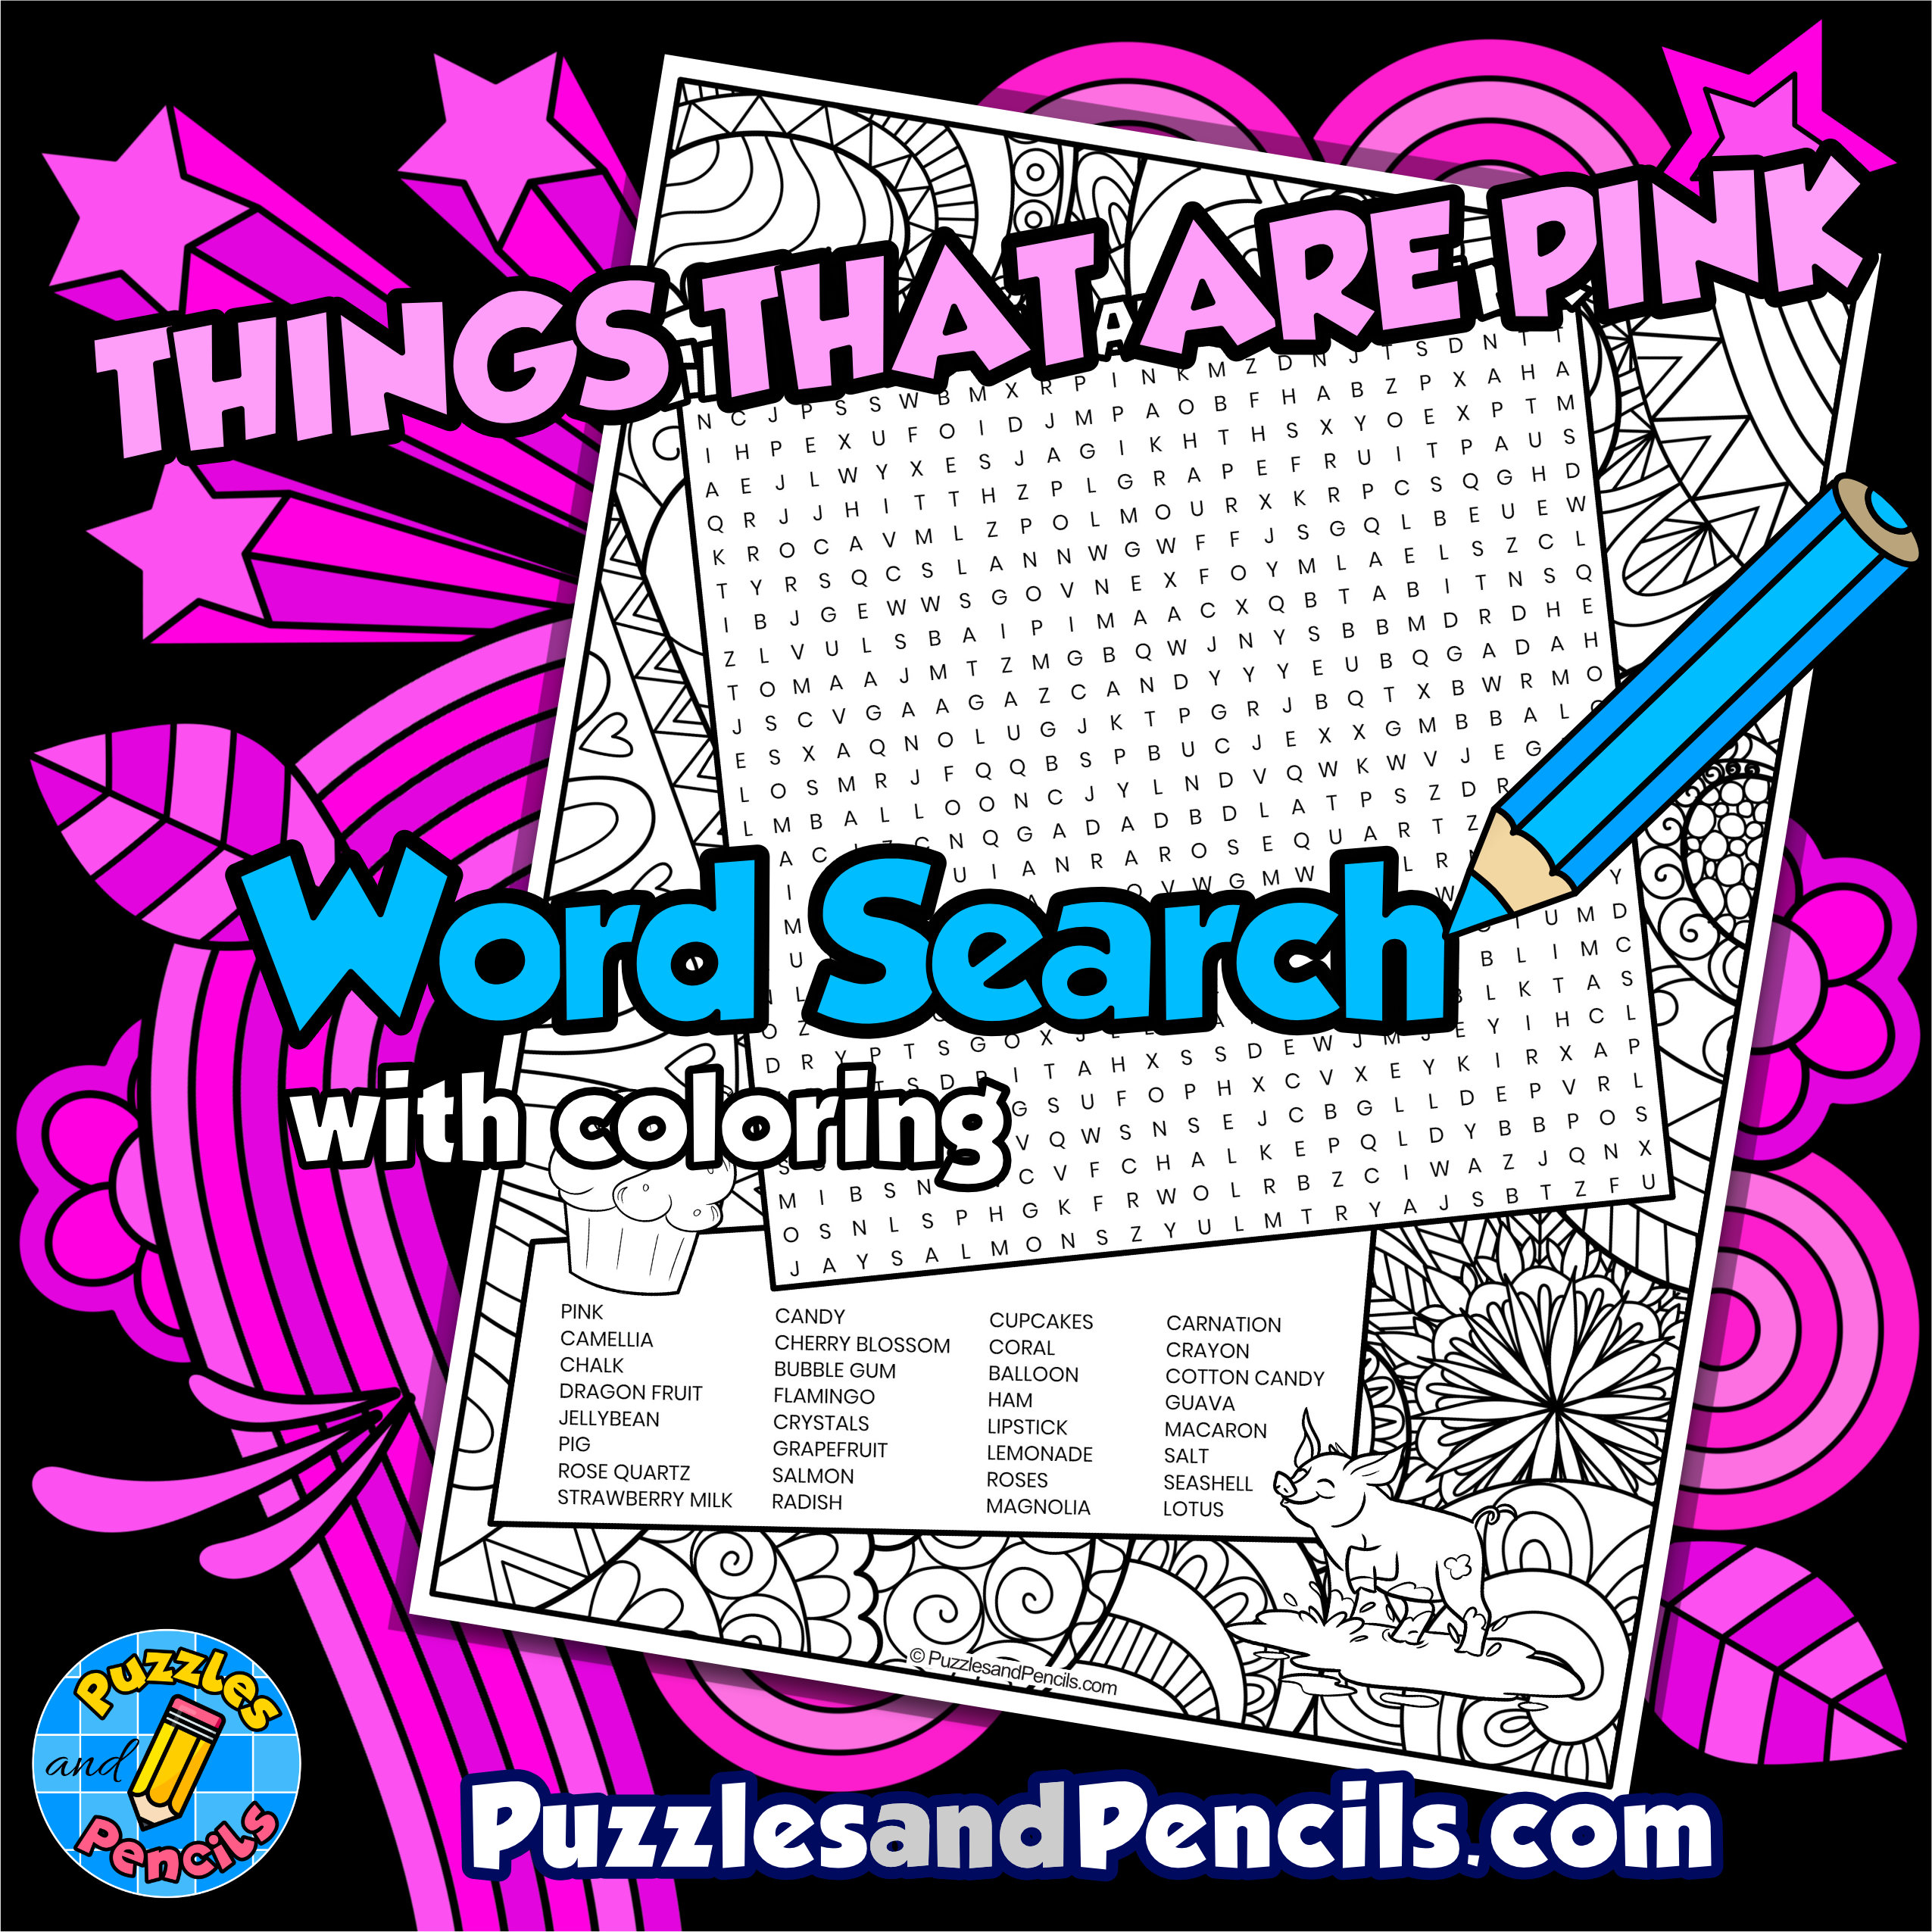 Things that are pink word search puzzle with coloring wordsearch made by teachers